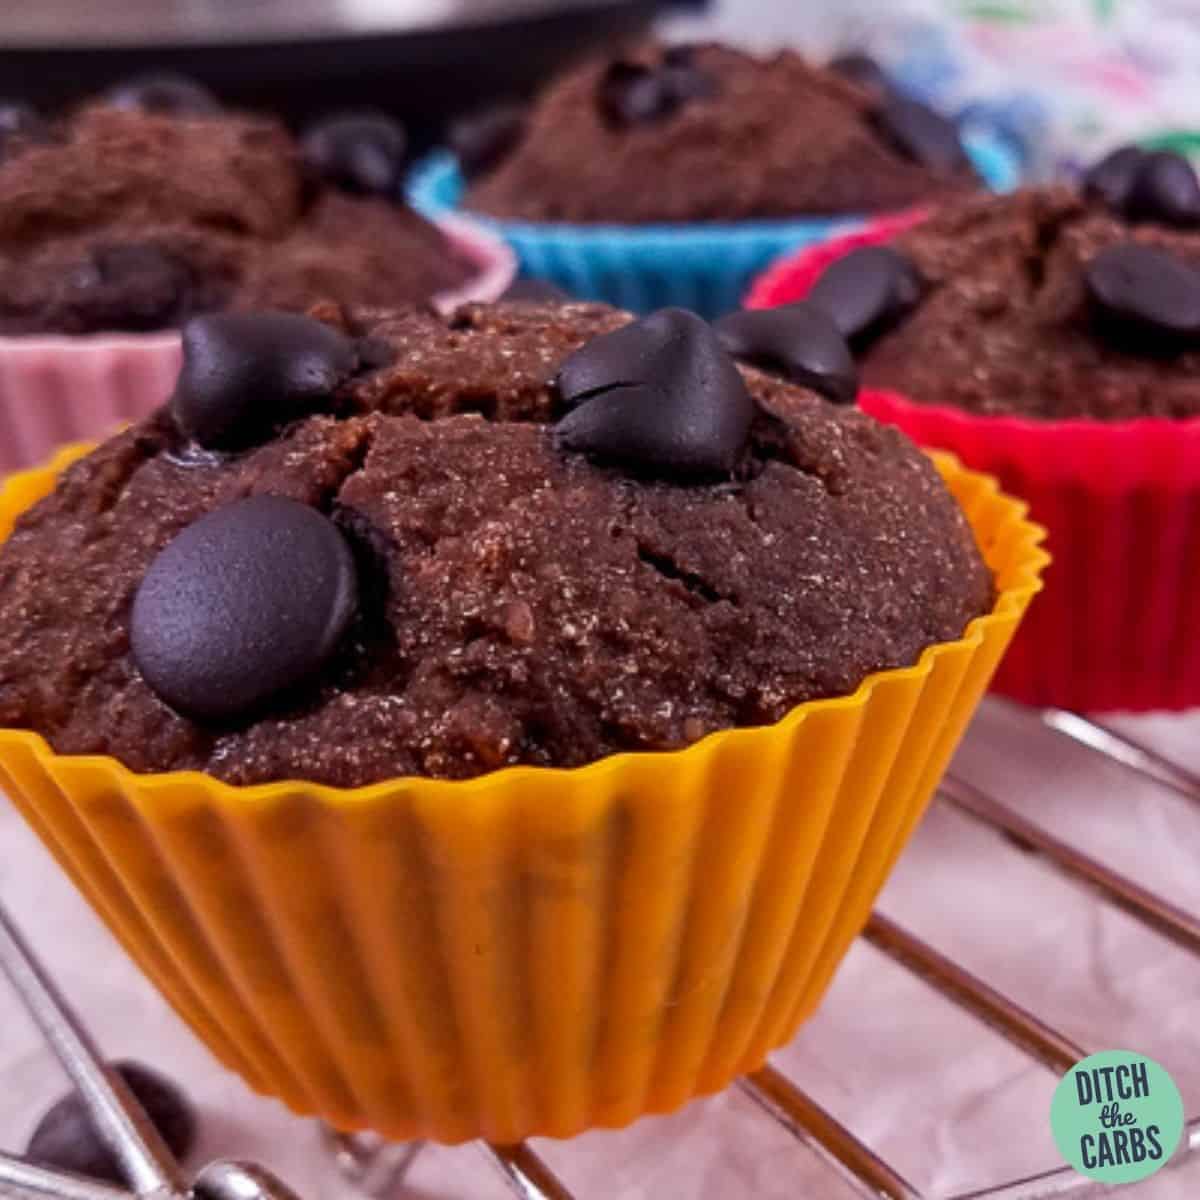 https://thinlicious.com/wp-content/uploads/2022/04/Instant-Pot-Chocolate-Muffins-Feature.jpg